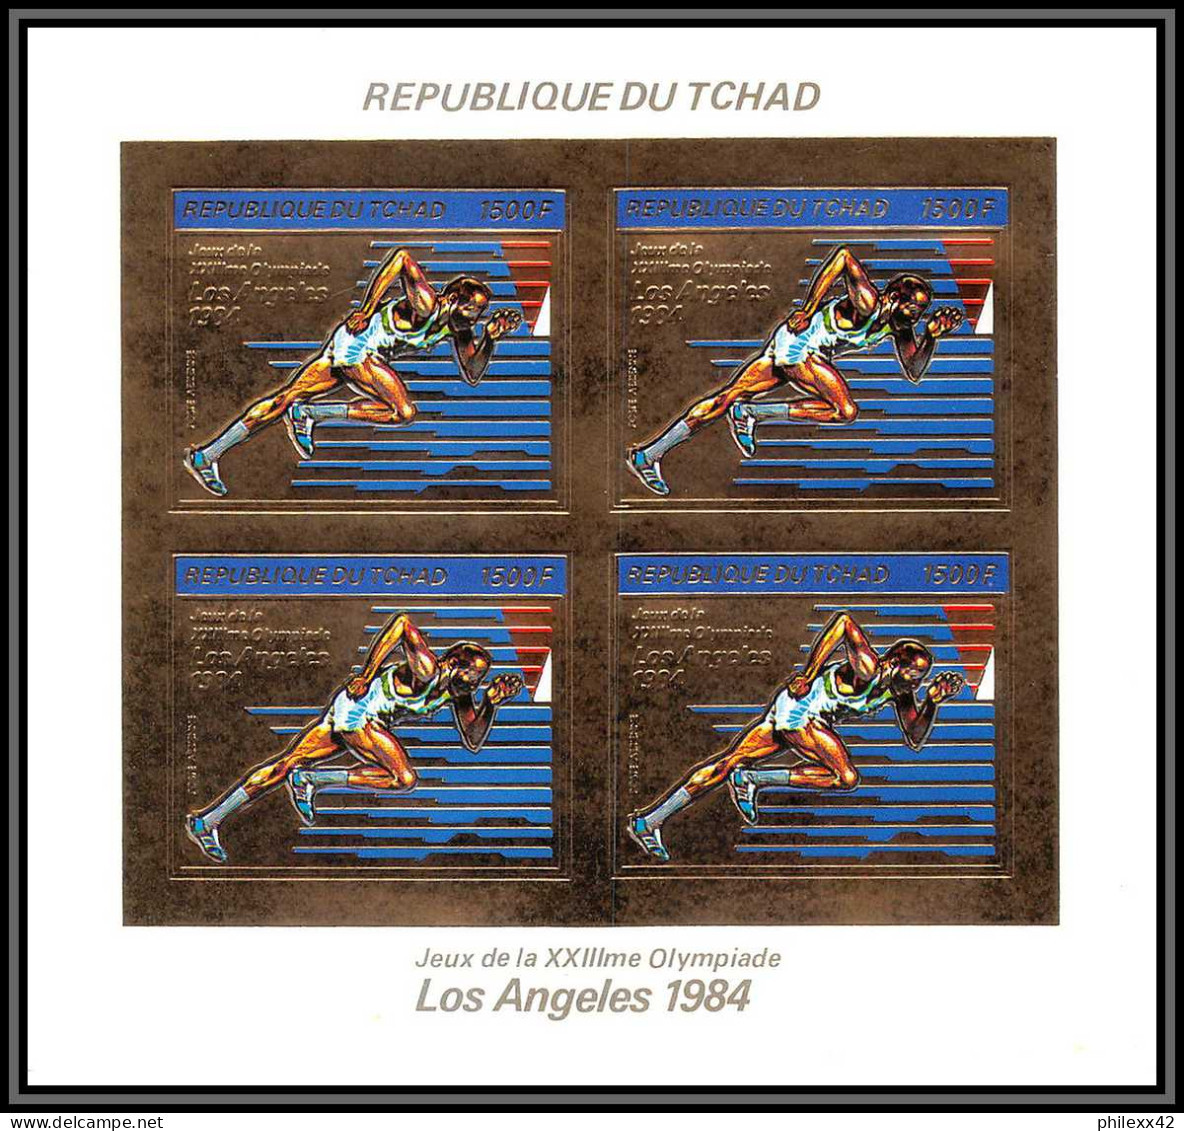 85896/ N°924 B Los Angeles 1984 Jeux Olympiques Olympic Games Tchad OR Gold ** MNH Bloc 4 Non Dentelé Imperf - Tchad (1960-...)